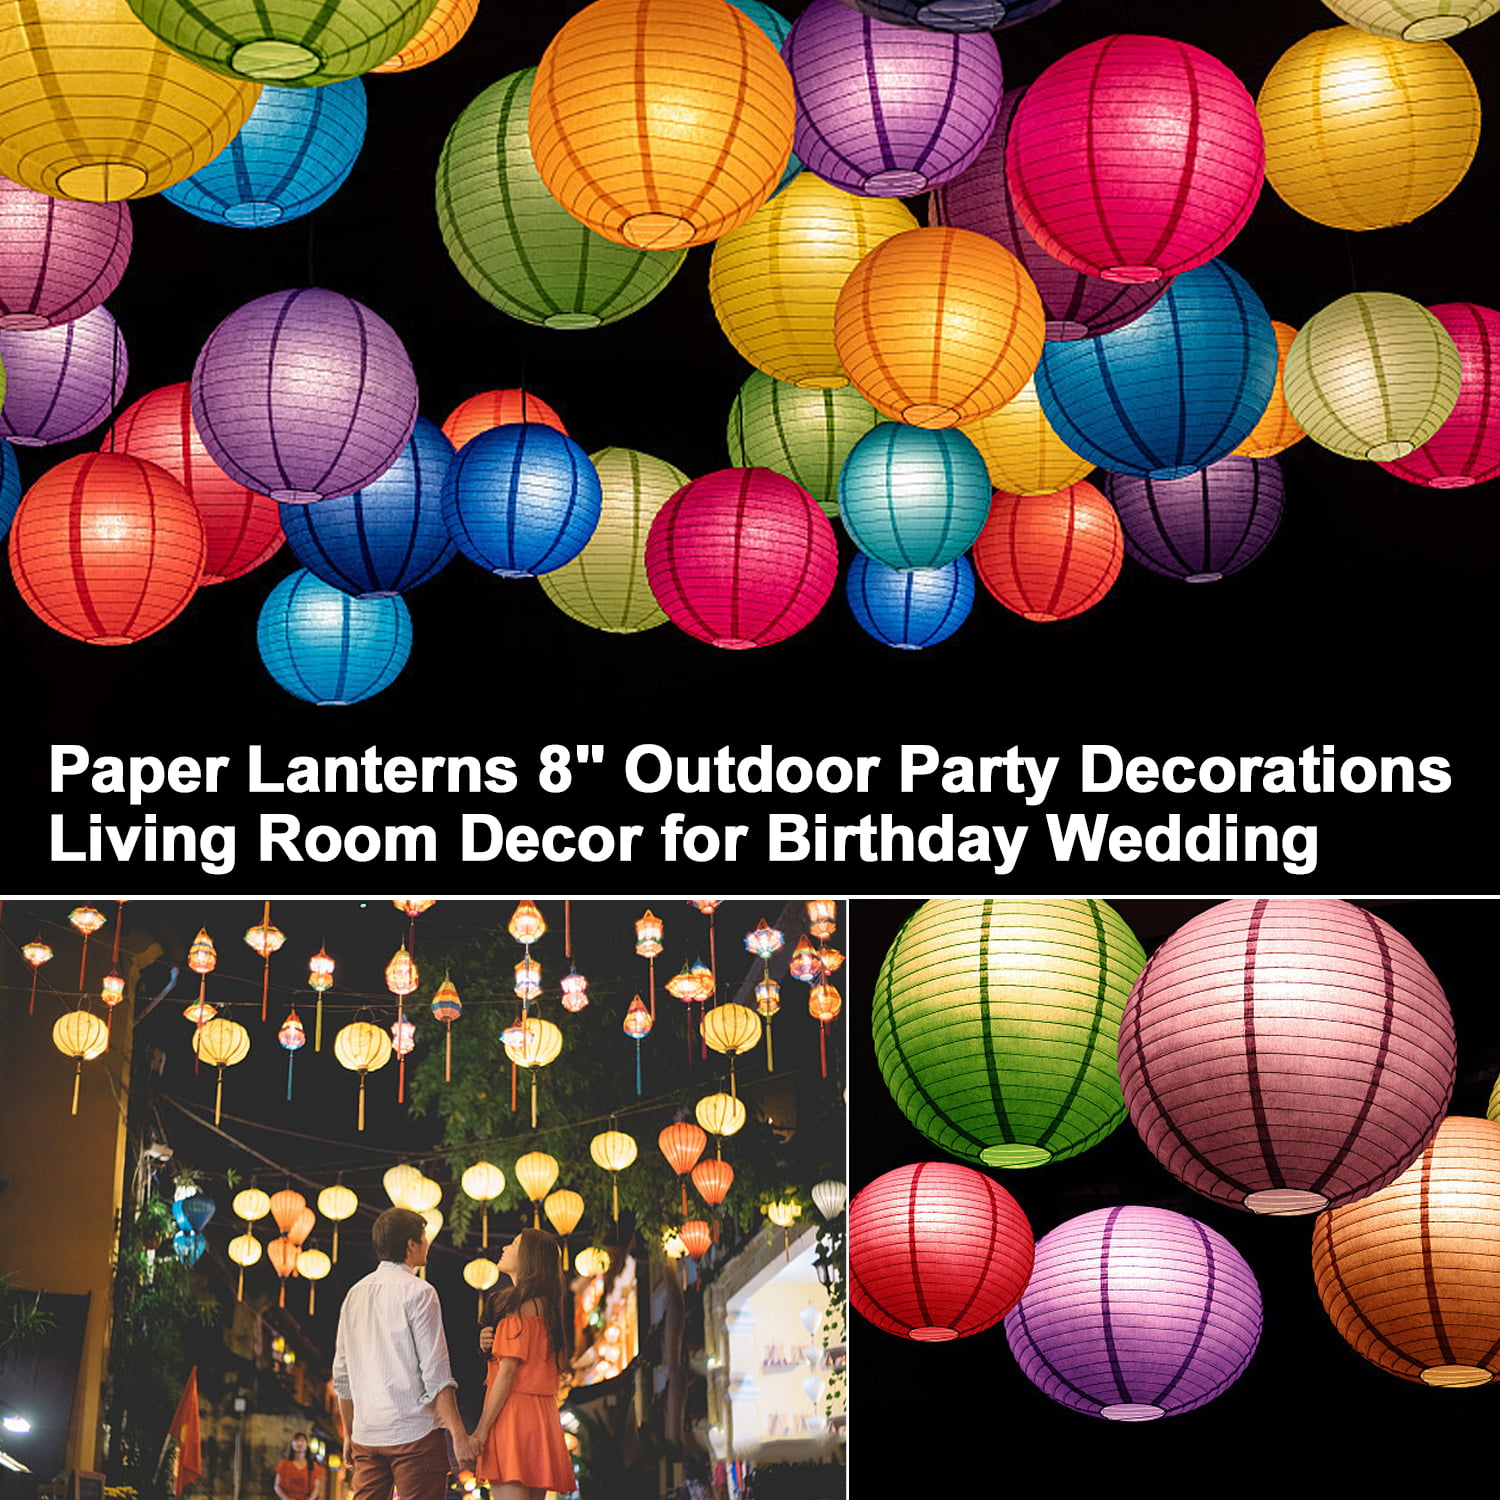 Ultimate 20pc Dark Purple Paper Lantern Party Pack - Assorted Sizes of 6, 8, 10, 12